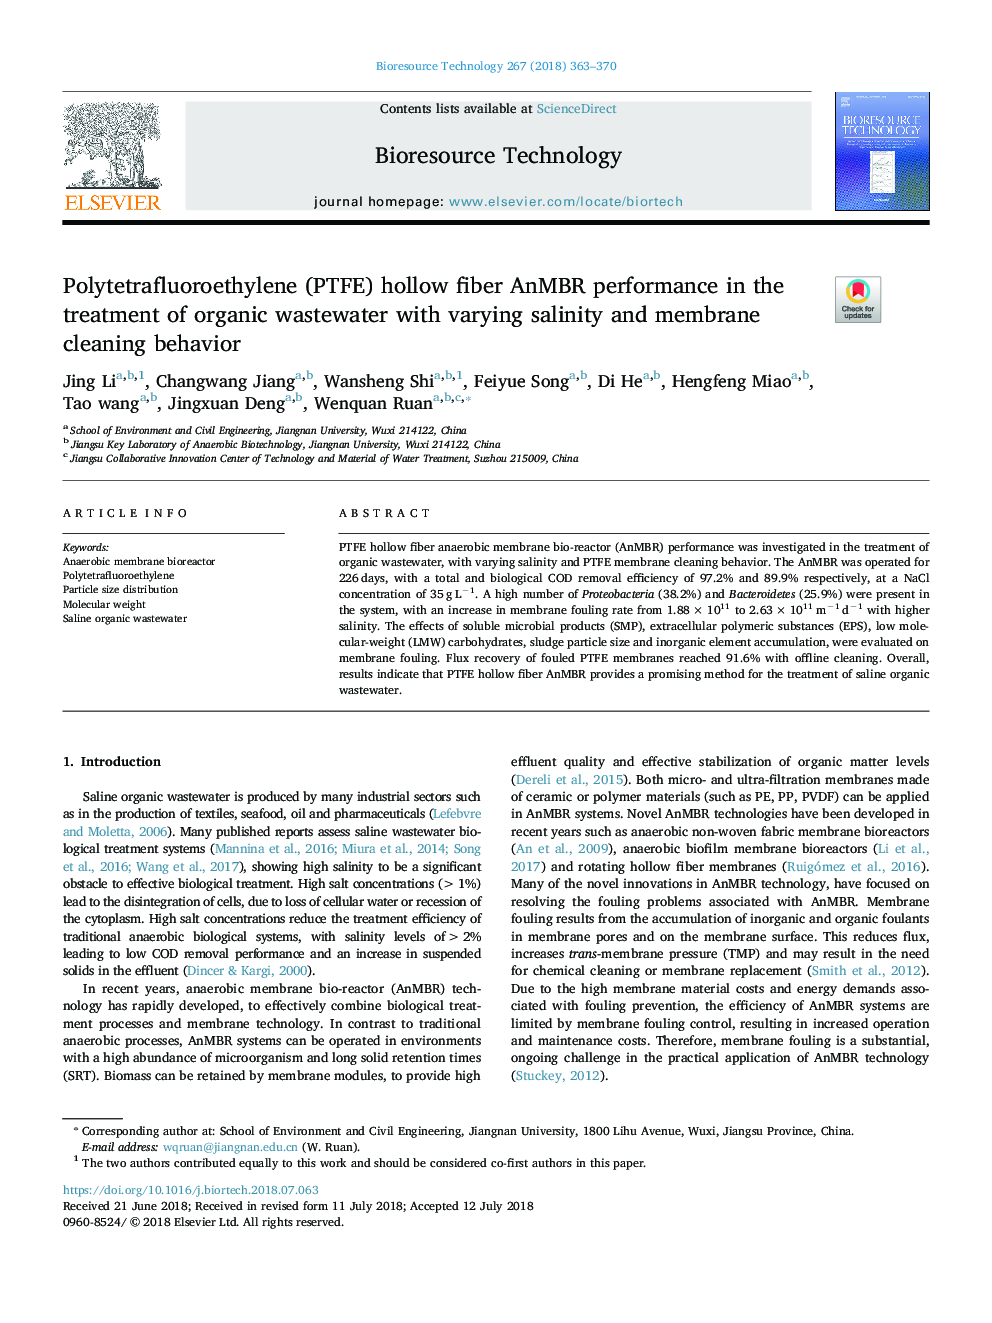 Polytetrafluoroethylene (PTFE) hollow fiber AnMBR performance in the treatment of organic wastewater with varying salinity and membrane cleaning behavior